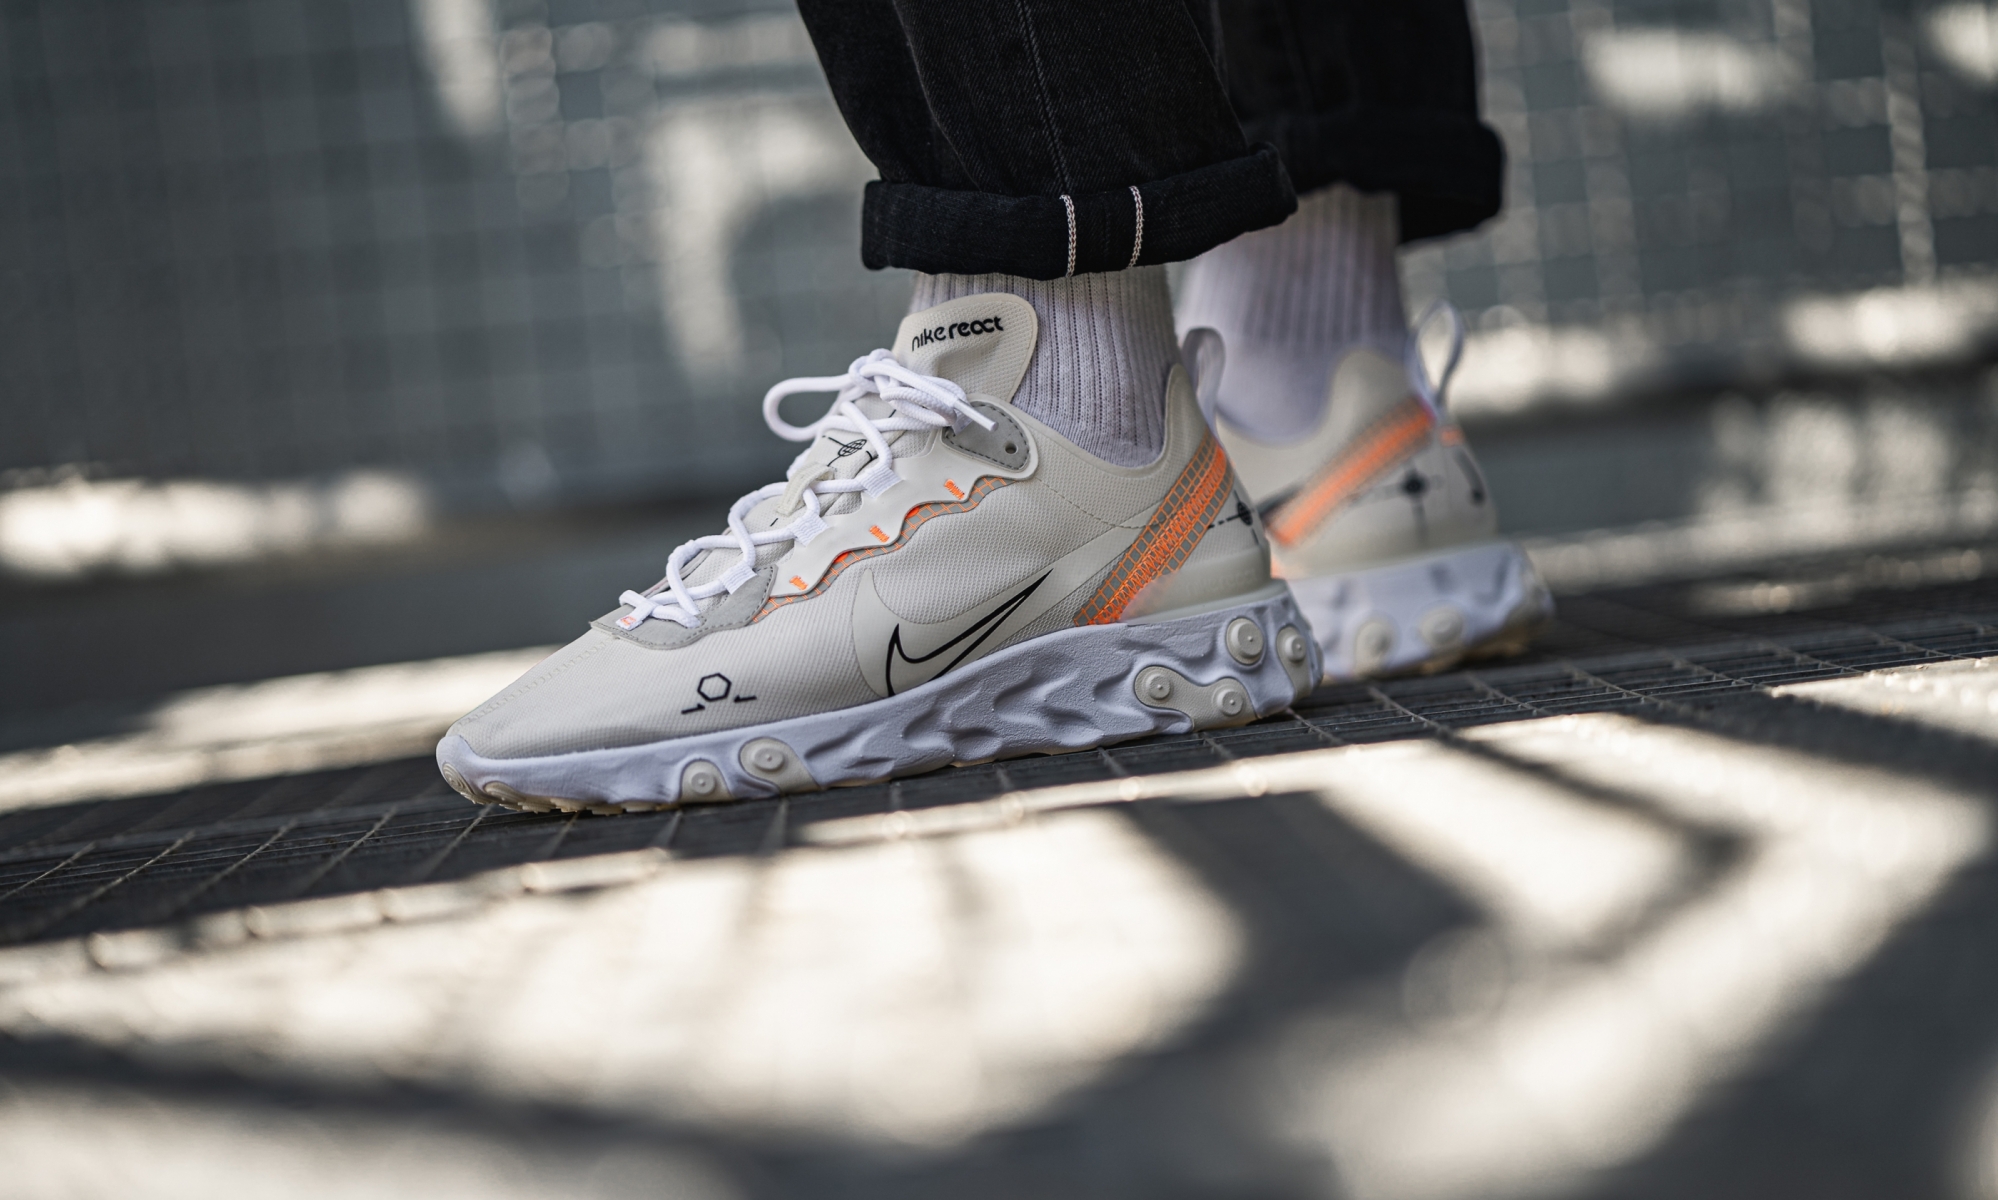 Onhandig Komkommer Klas Kicks Deals Canada on Twitter: "Your perfect companion for the summer, you  won't want to overlook this great new "Sail/Light Bone" colourway of the  Nike React Element 55 that can now be